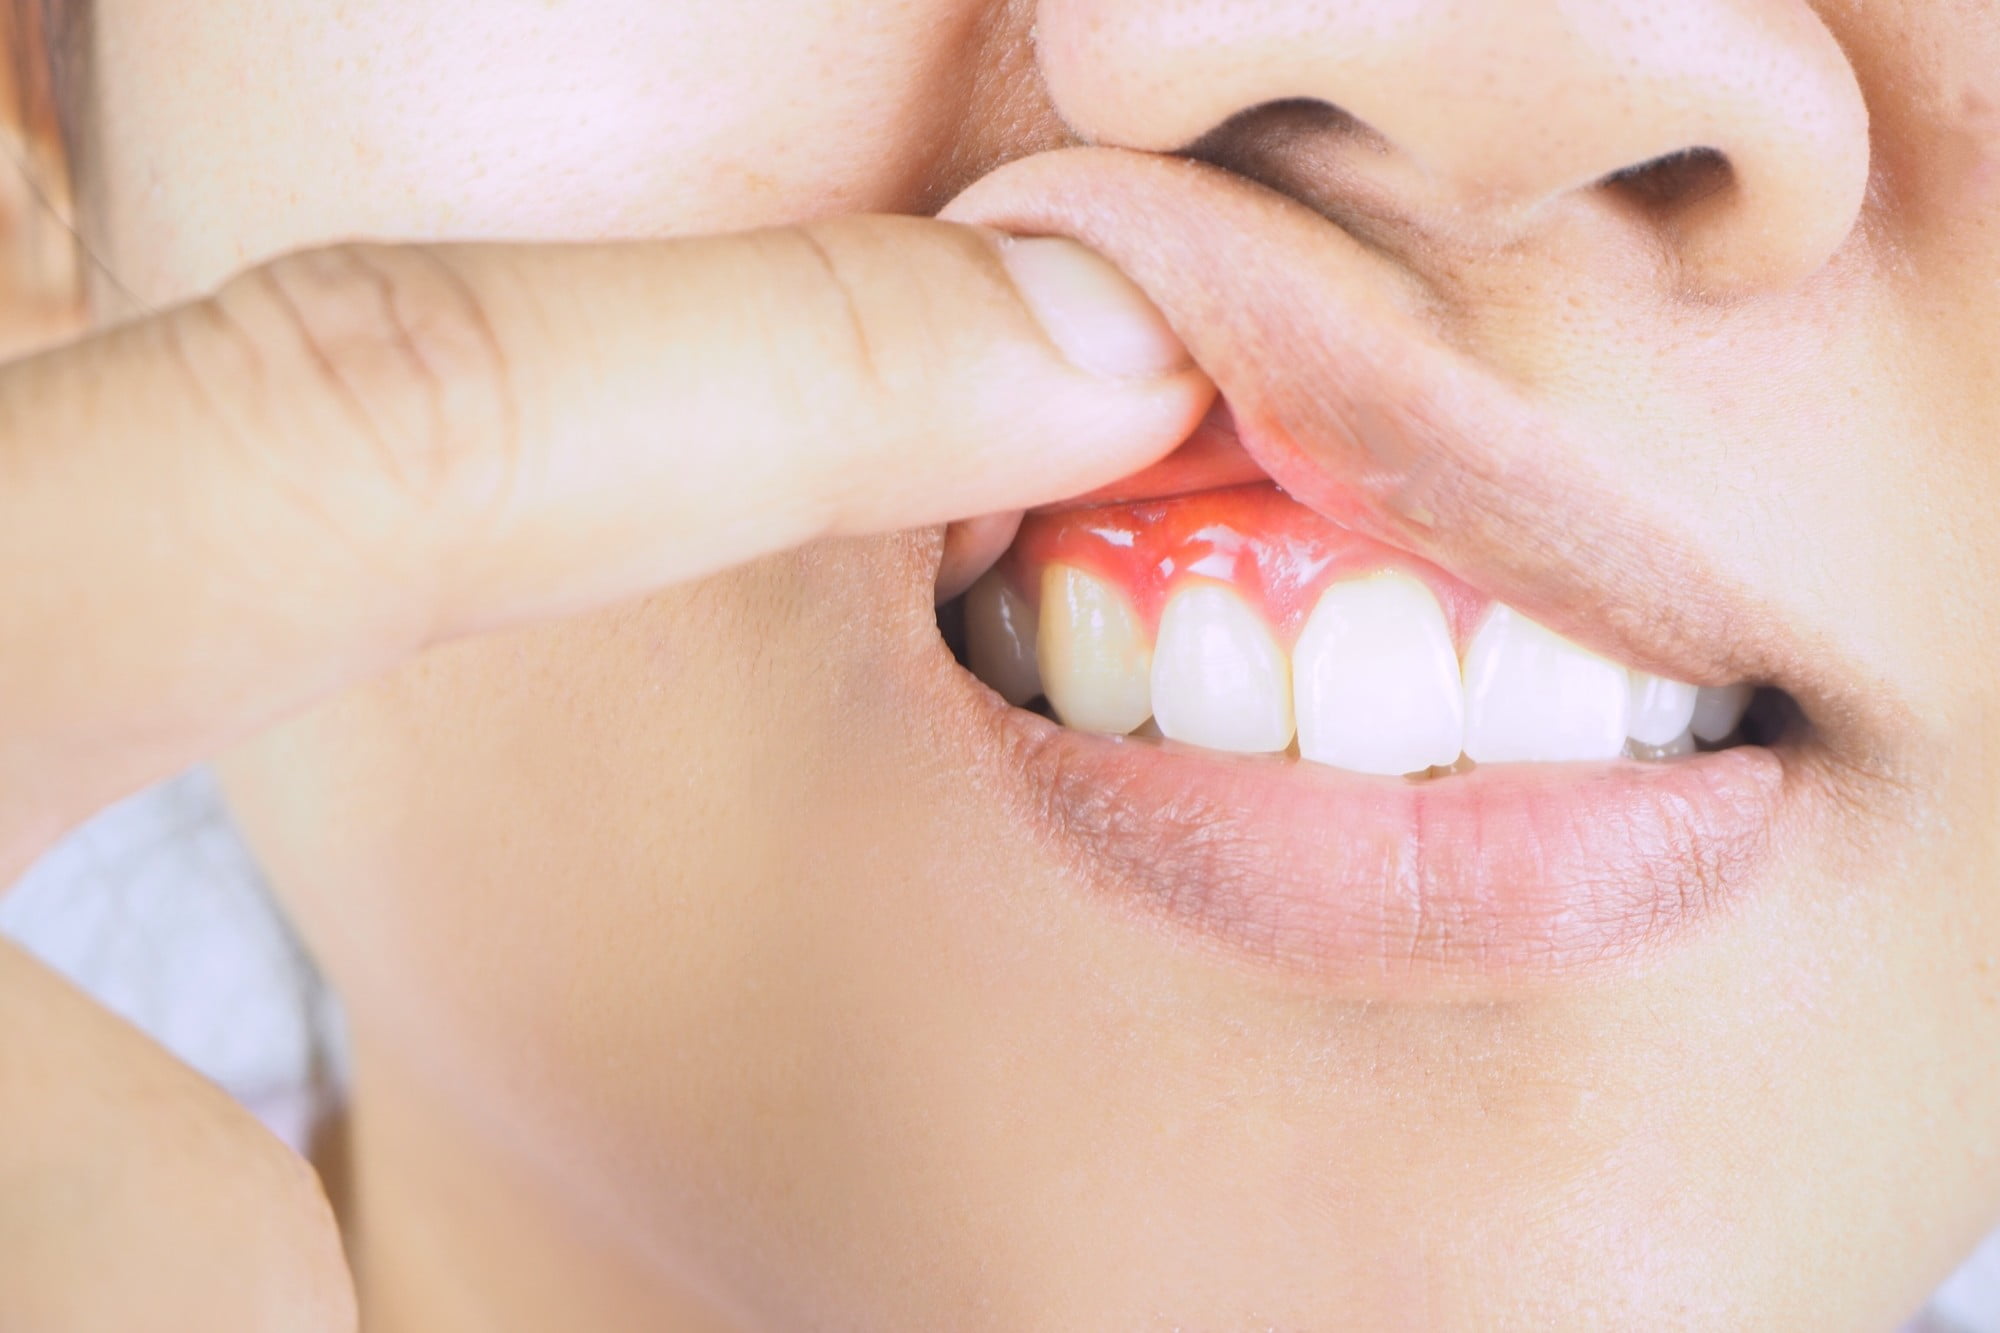 Would you like to know how to remove tartar from teeth without a dentist? Read on to learn what you need to know on the subject.